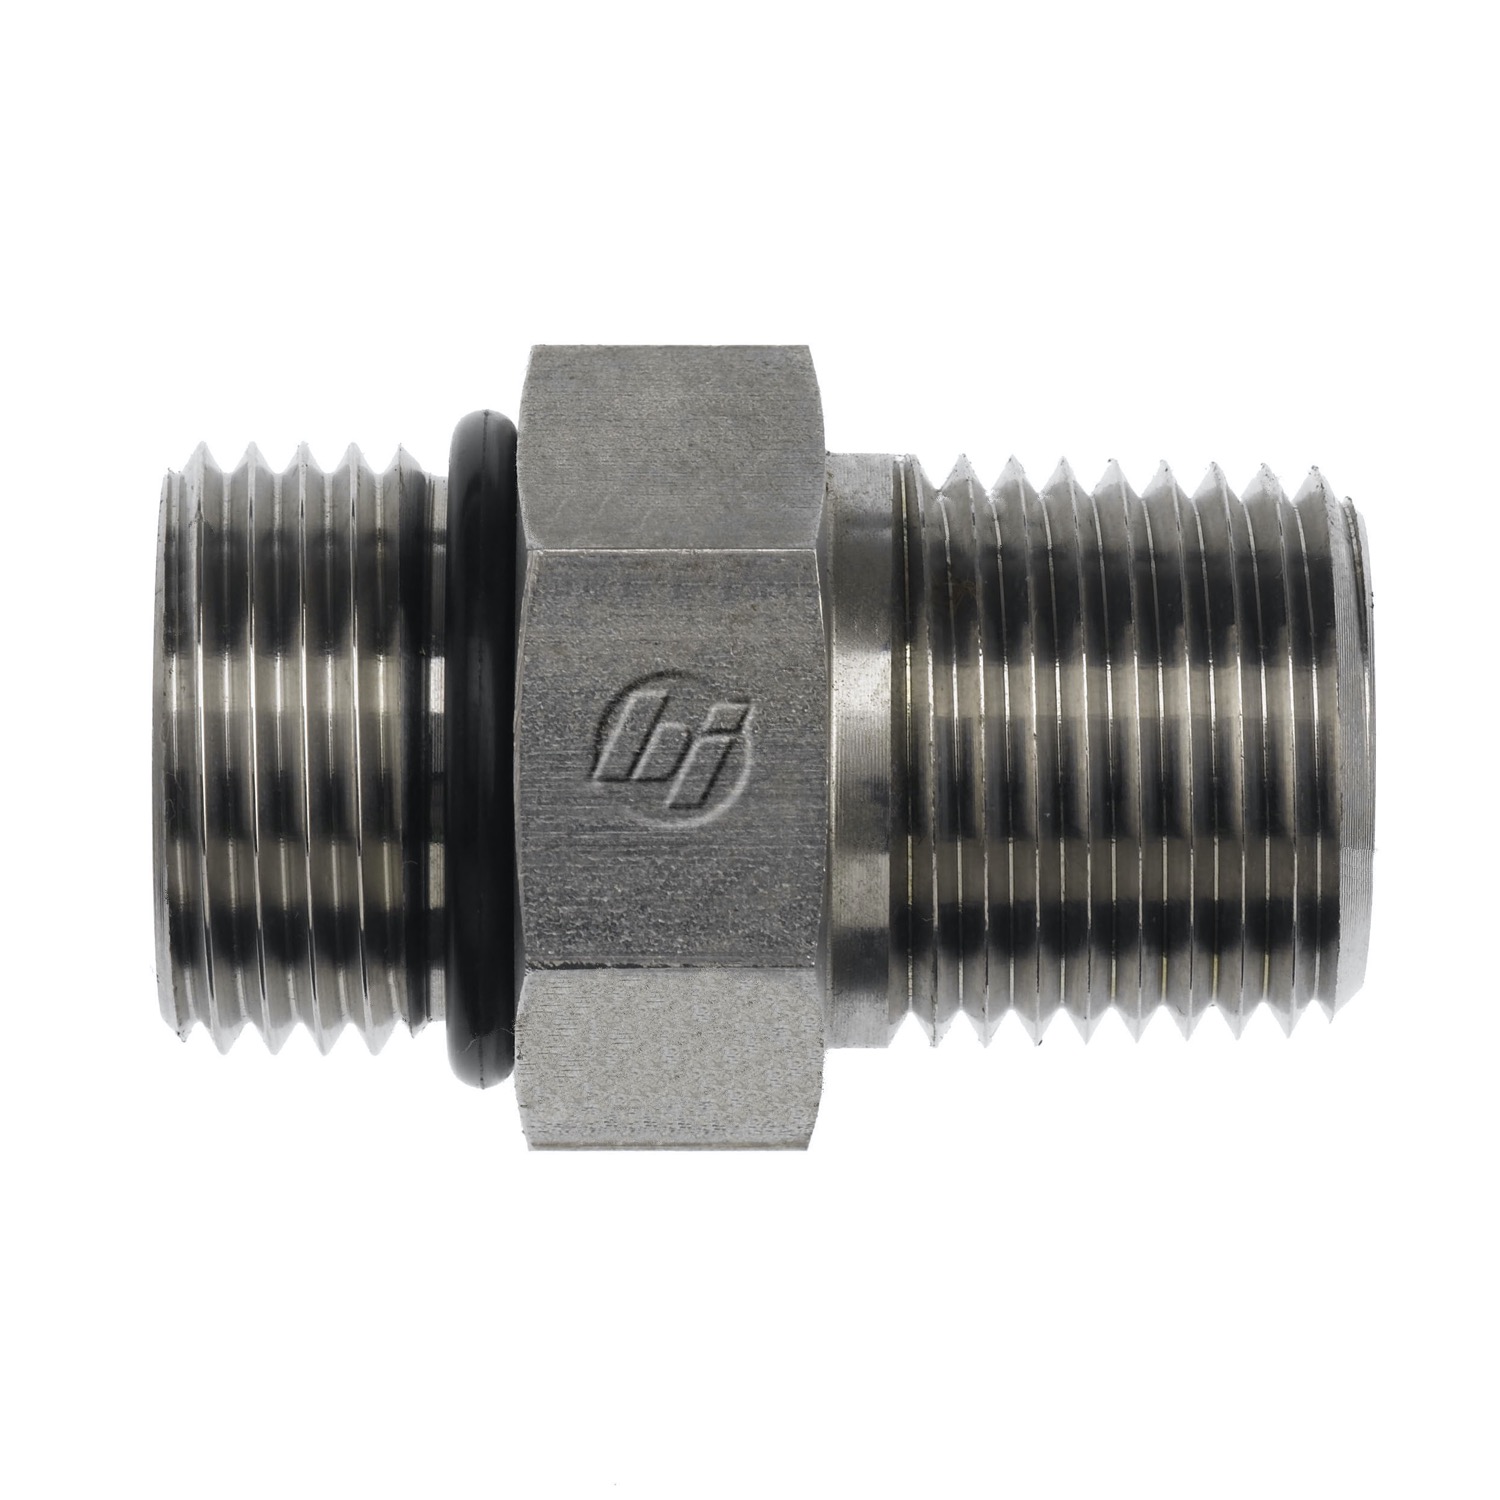 Hydraulic Hose Adapters - Straight Fitting, O-Ring Boss to NPTF, 6401 Series 6401-20-20-O